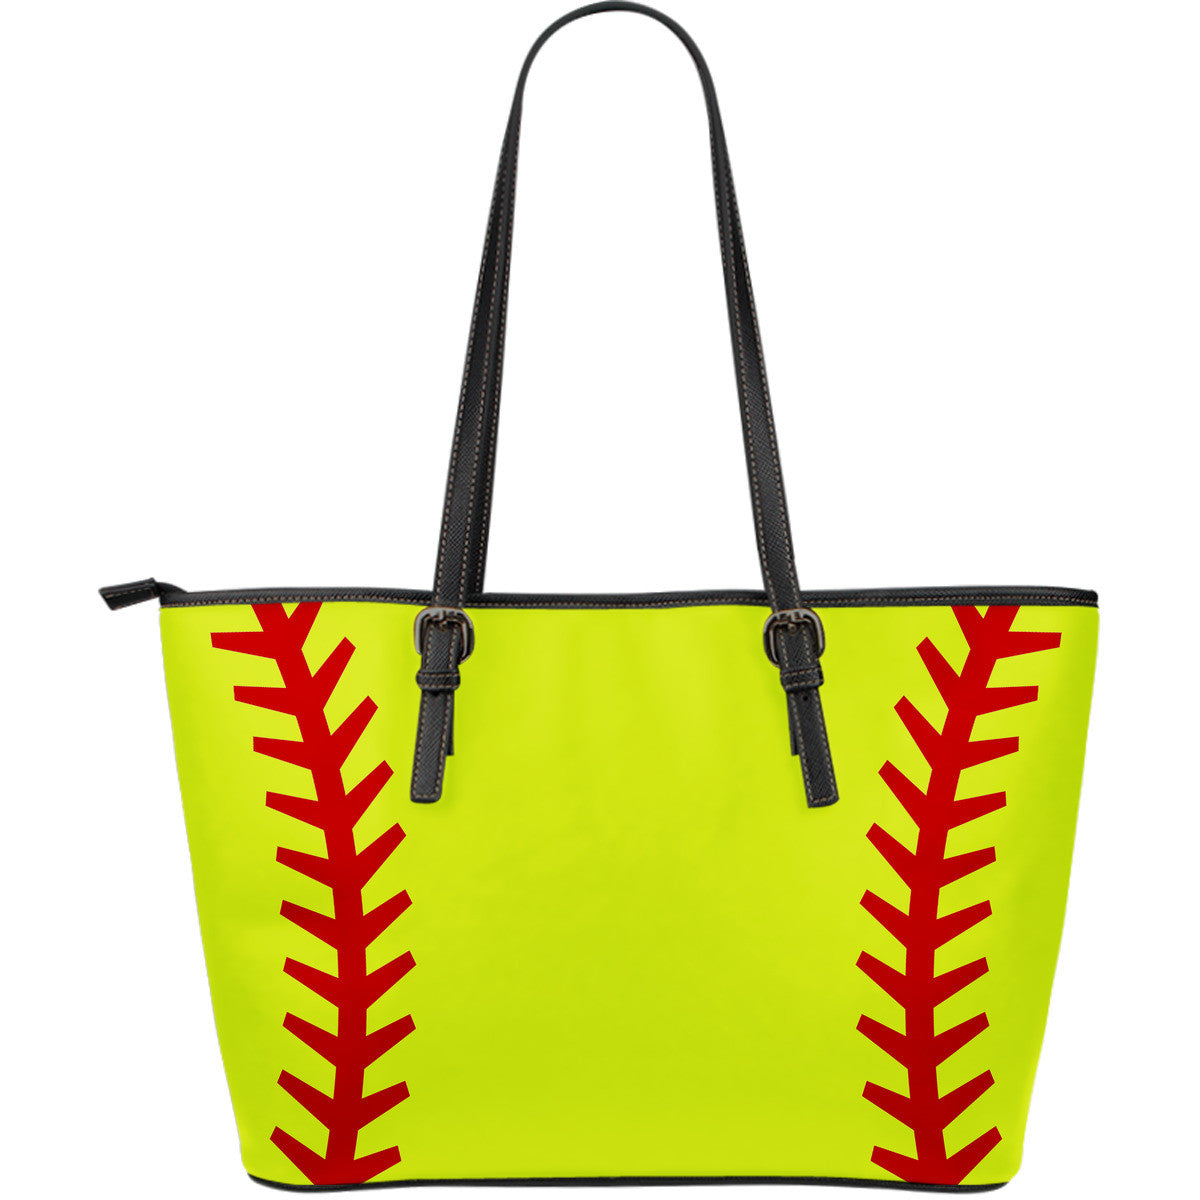 Softball Tote Bags with Ball Stitch Design